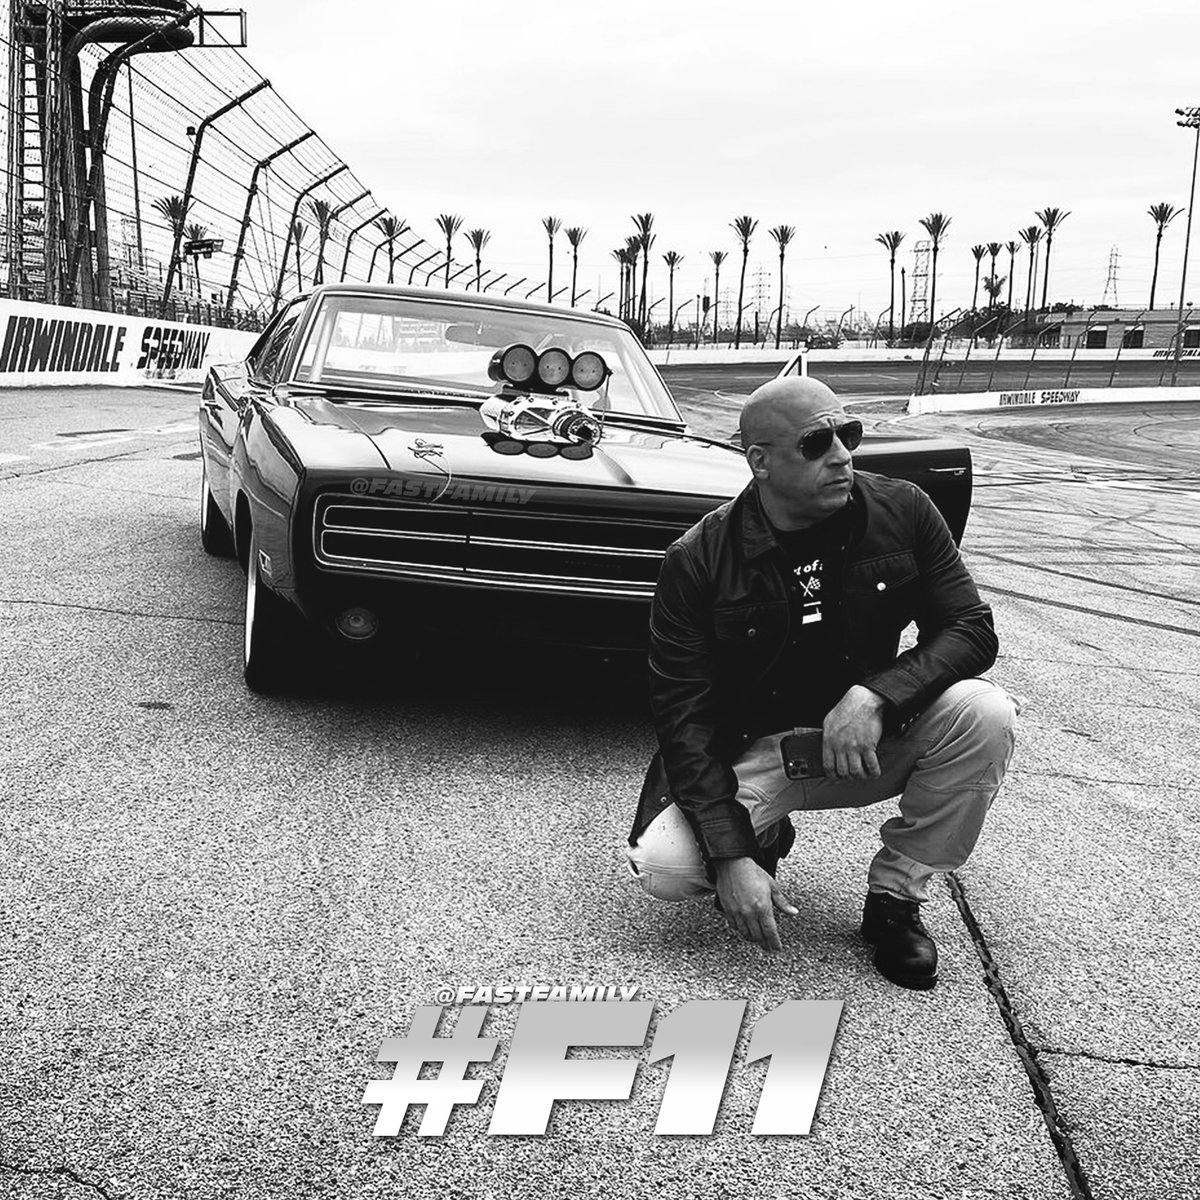 📸 @VinDiesel is back on the track in the early stages of filming the final chapter in @TheFastSaga. #F11 #FastFamily